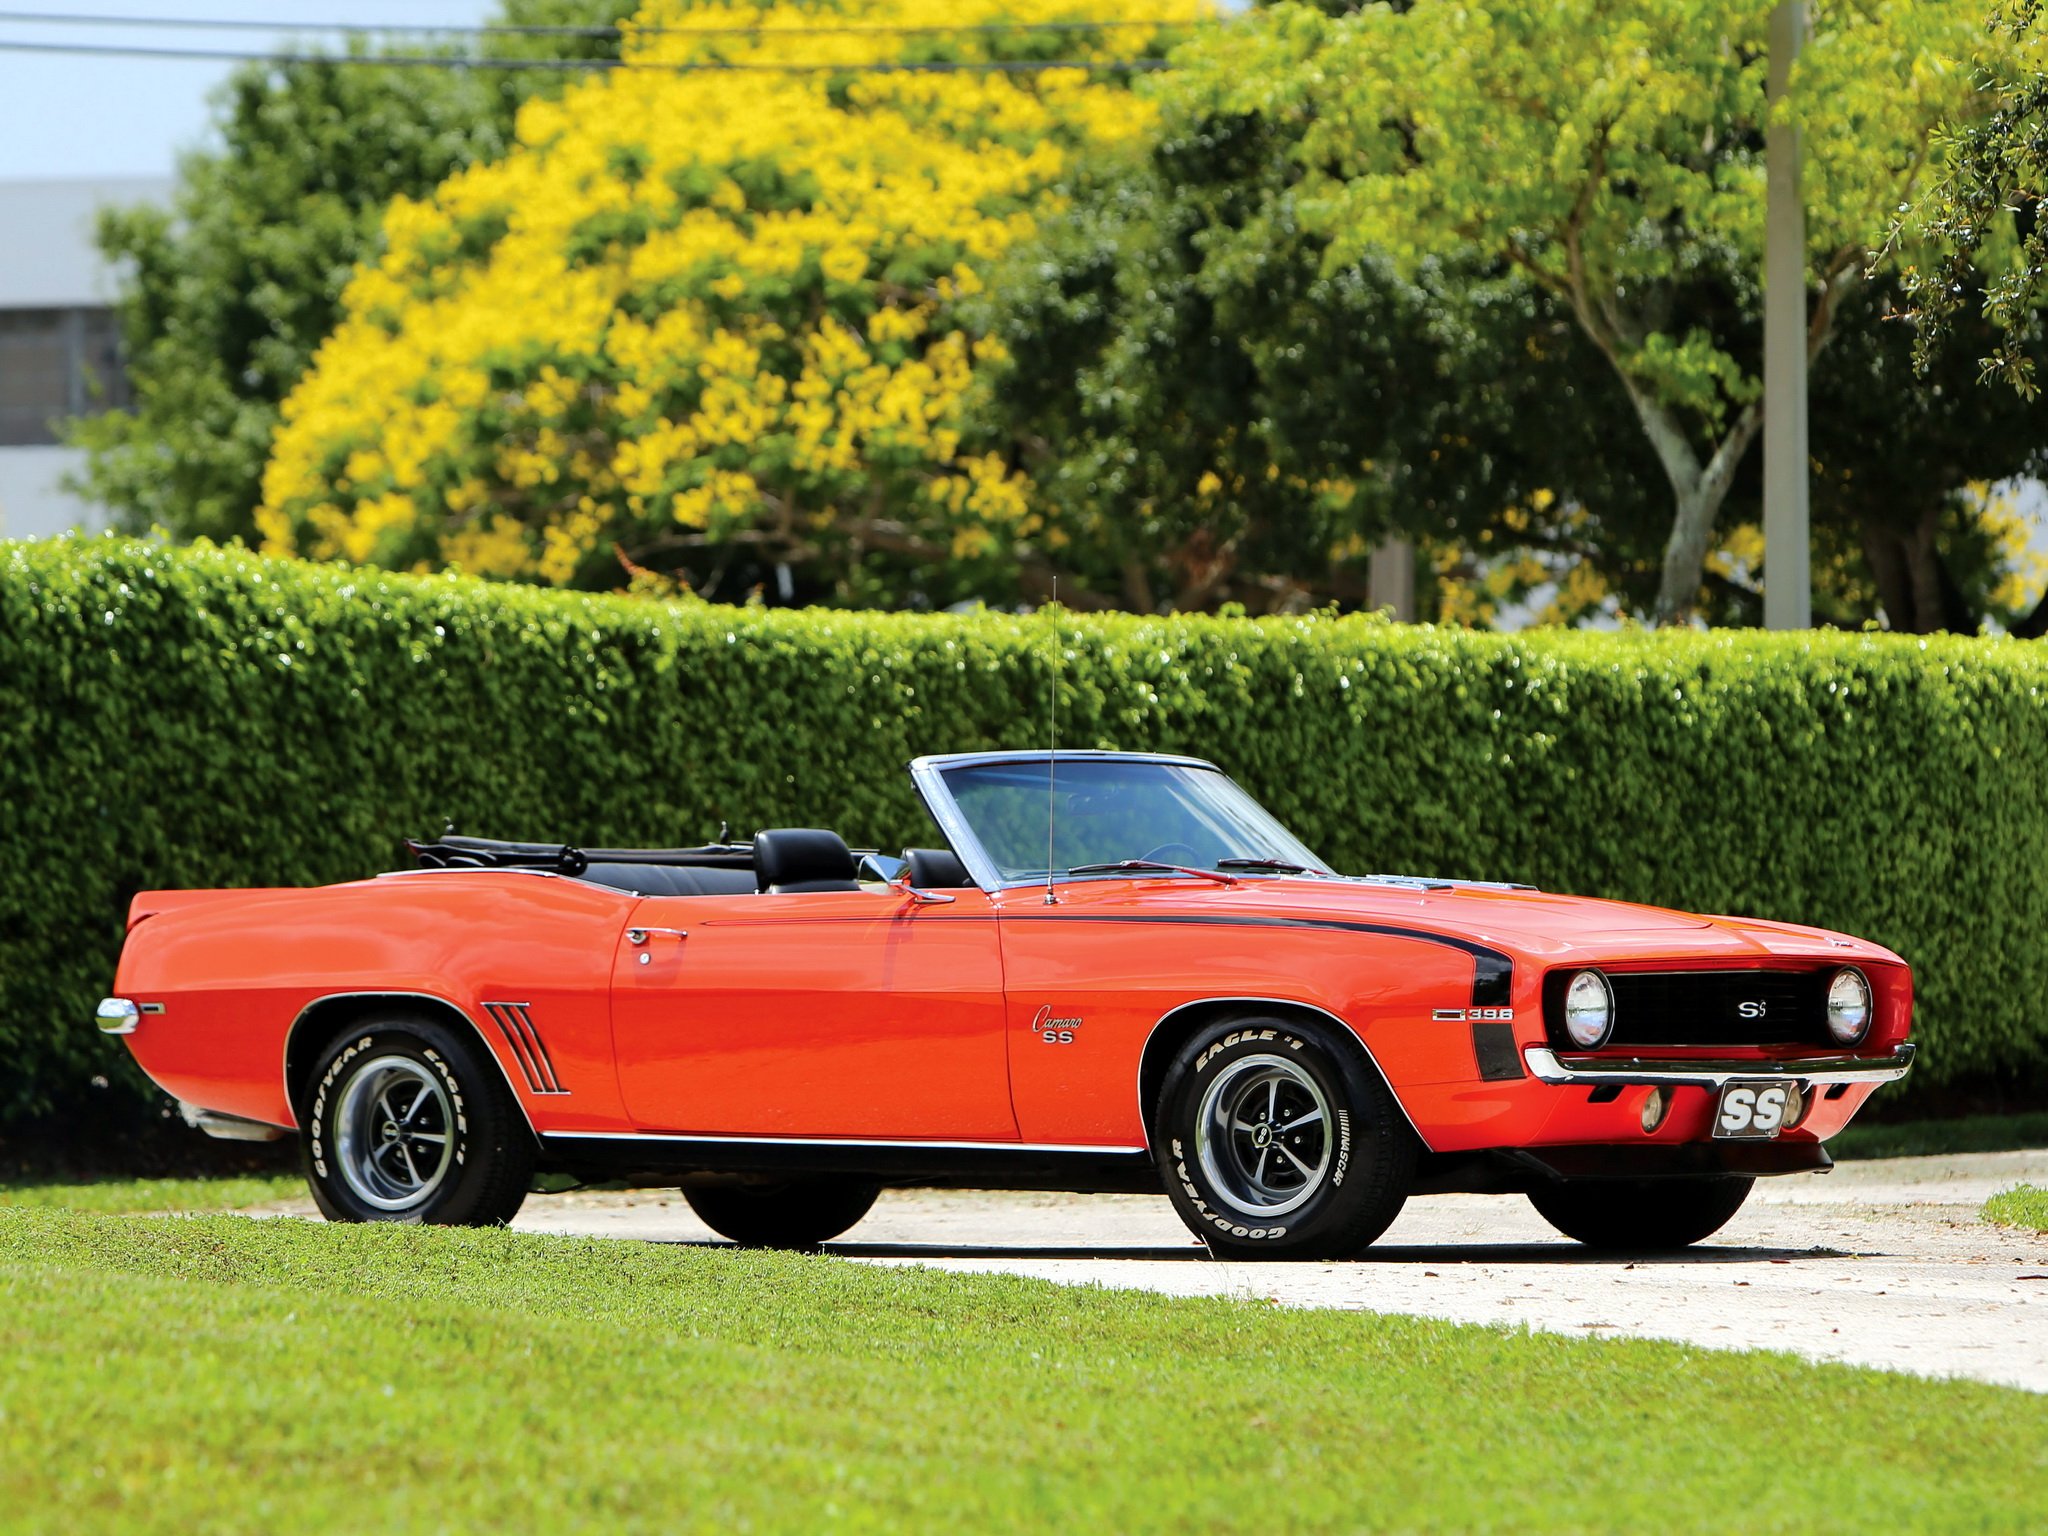 1969 Chevrolet Camaro Ss 396 Convertible Muscle Classic 1